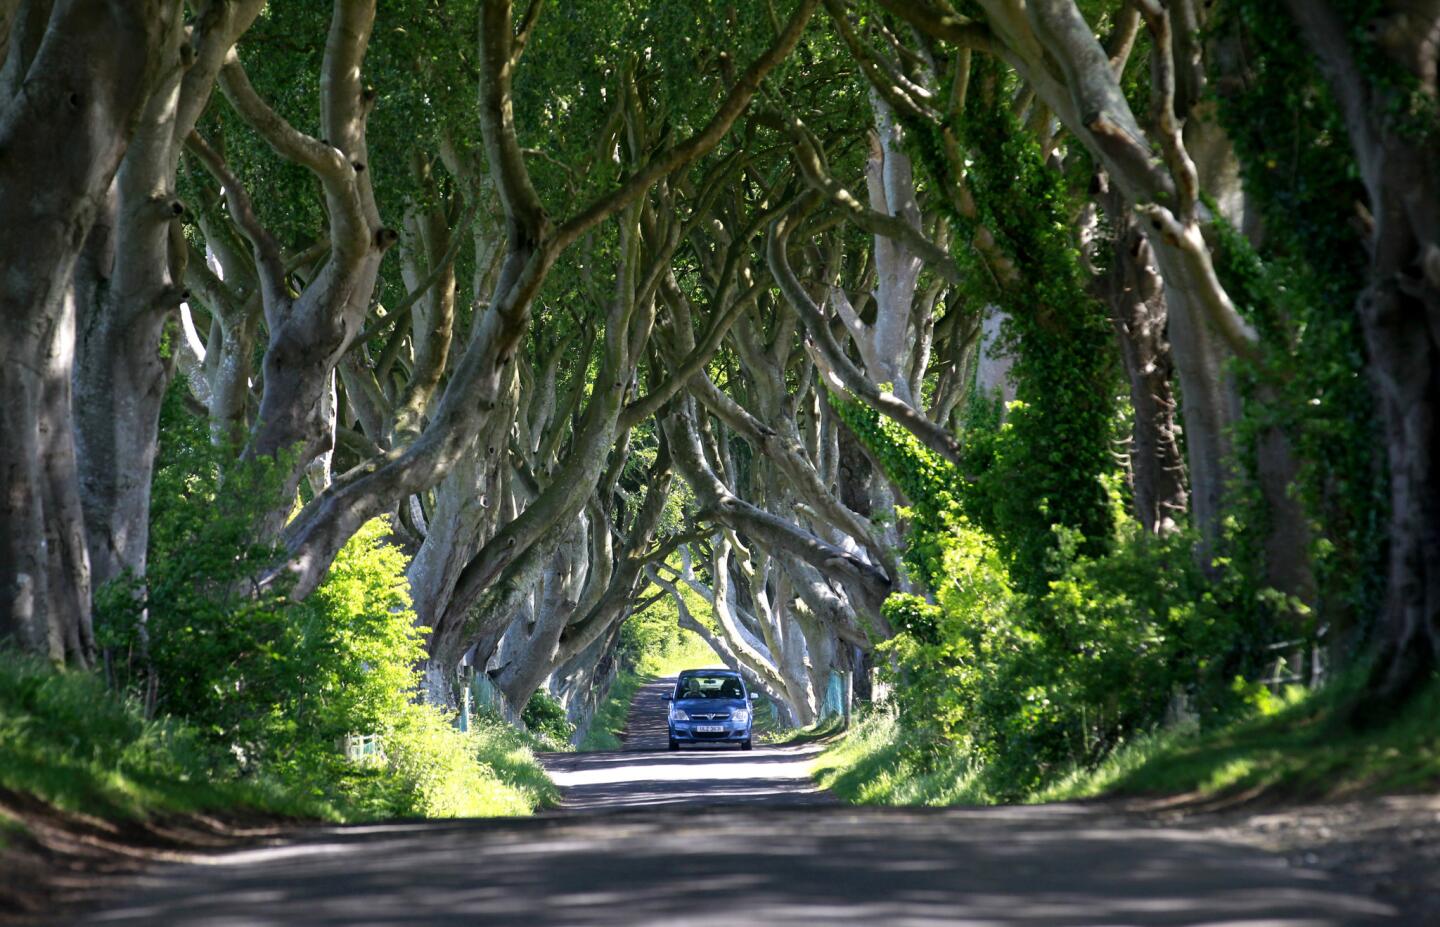 In Westeros, Kingsroad is the longest and grandest highway; in real life, it's the famous Dark Hedges in Northern Ireland.